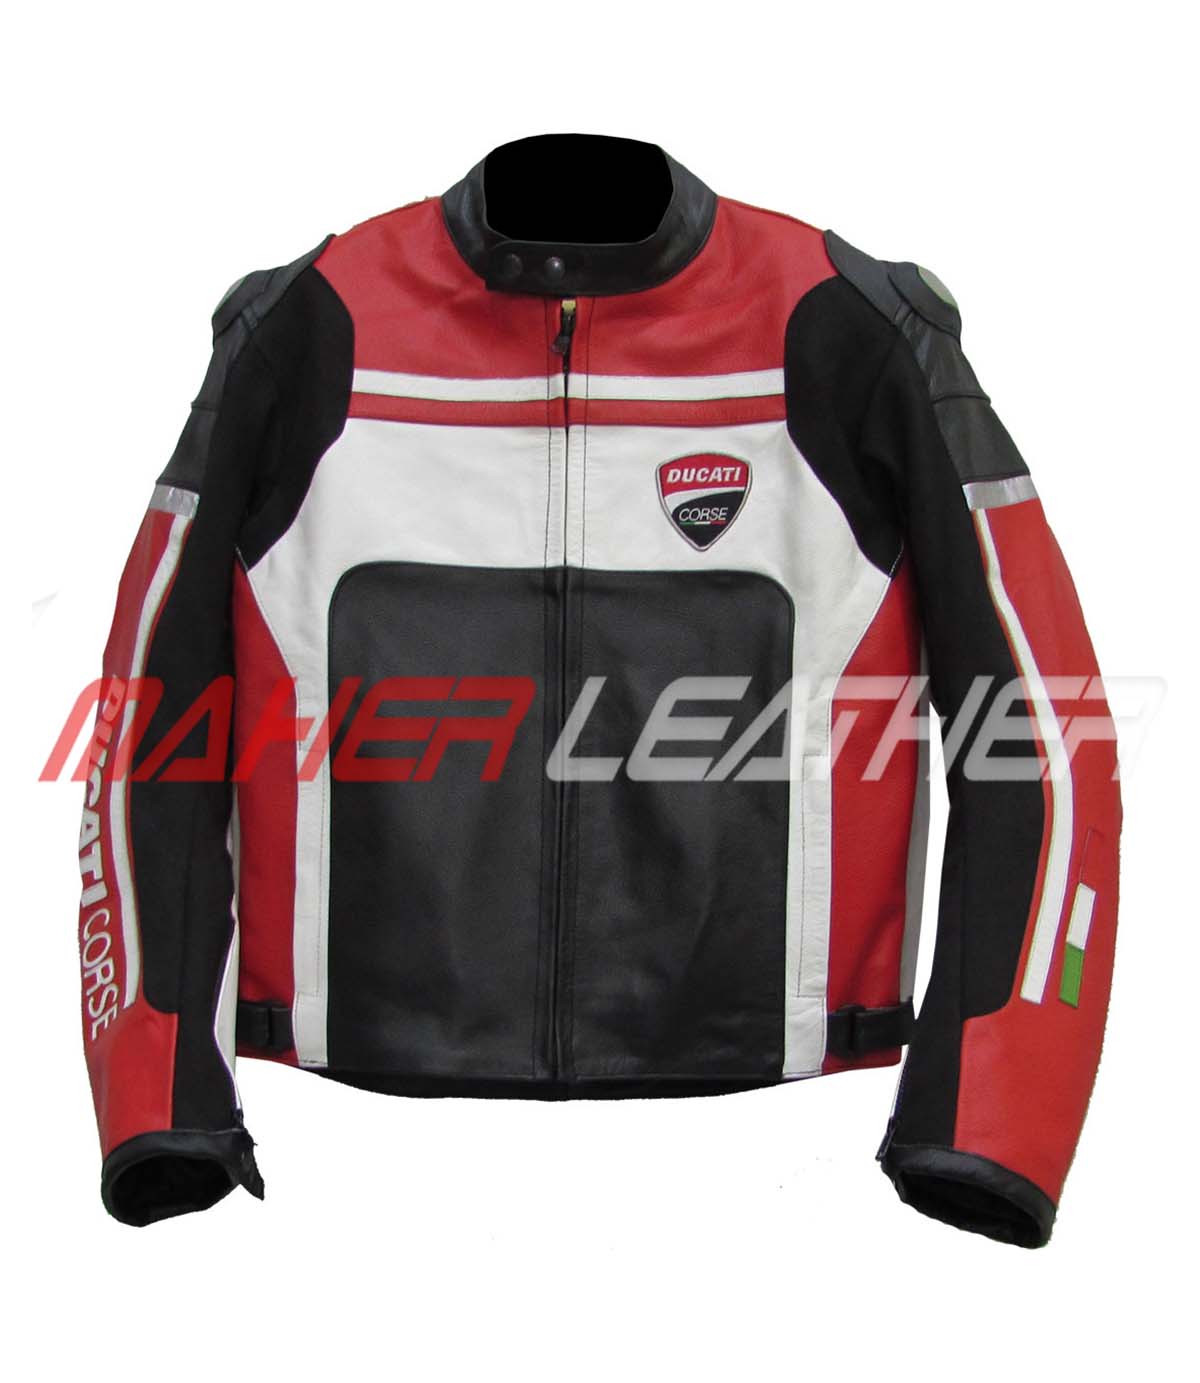 The ducati corse leather jacket